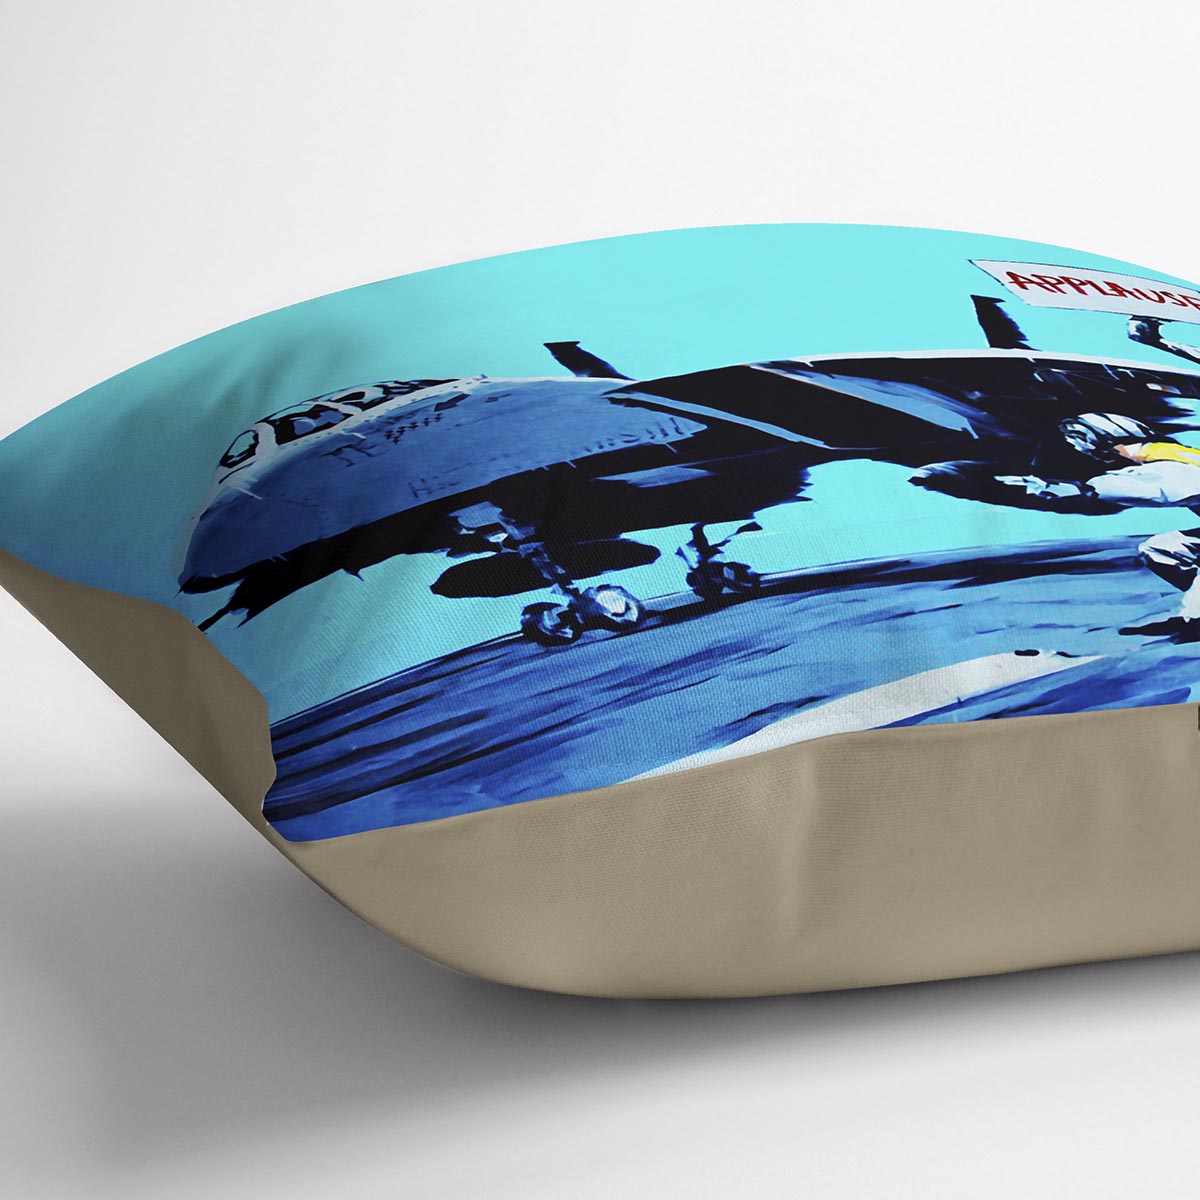 Banksy Aircraft Carrier Applause Cushion